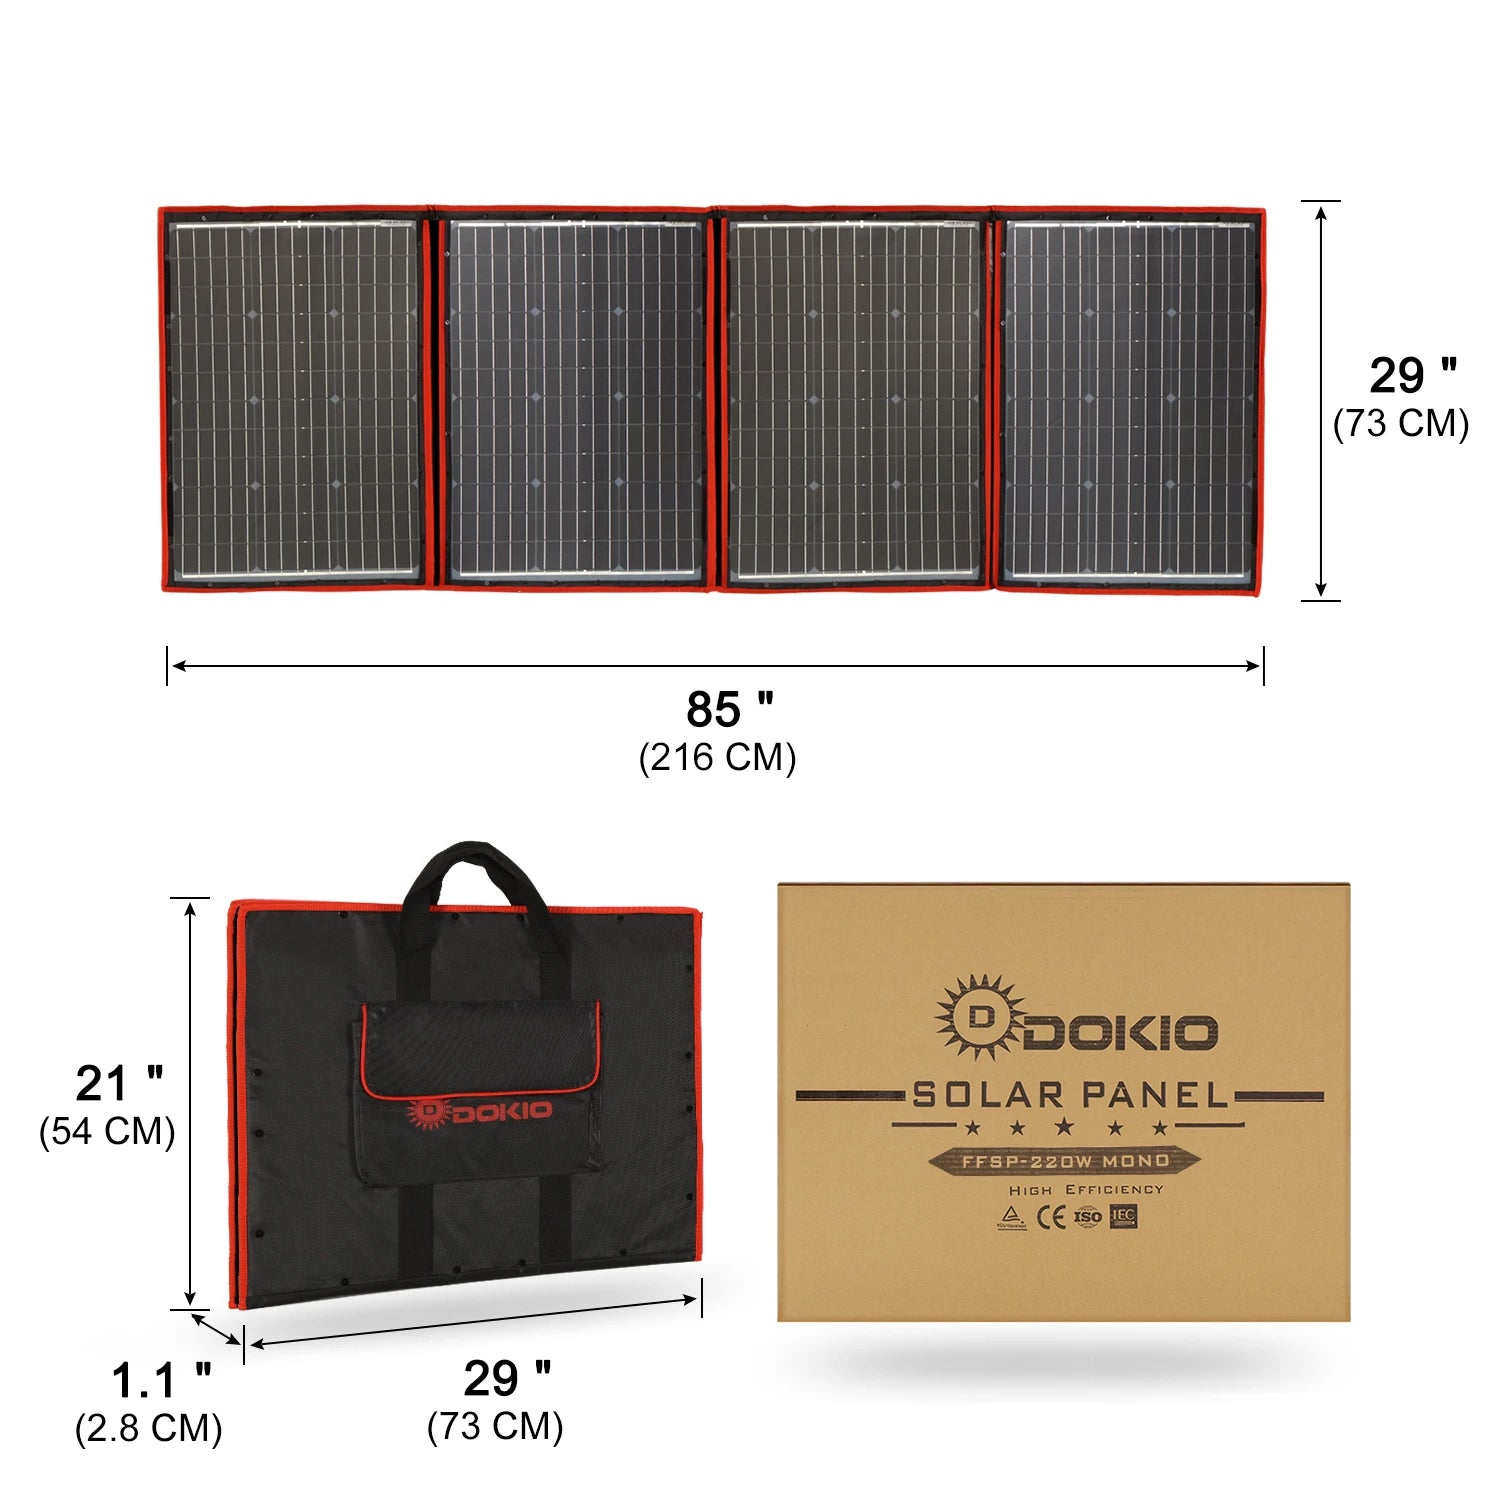 High-efficiency solar panel with quality silicon materials for stable and long-lasting performance.